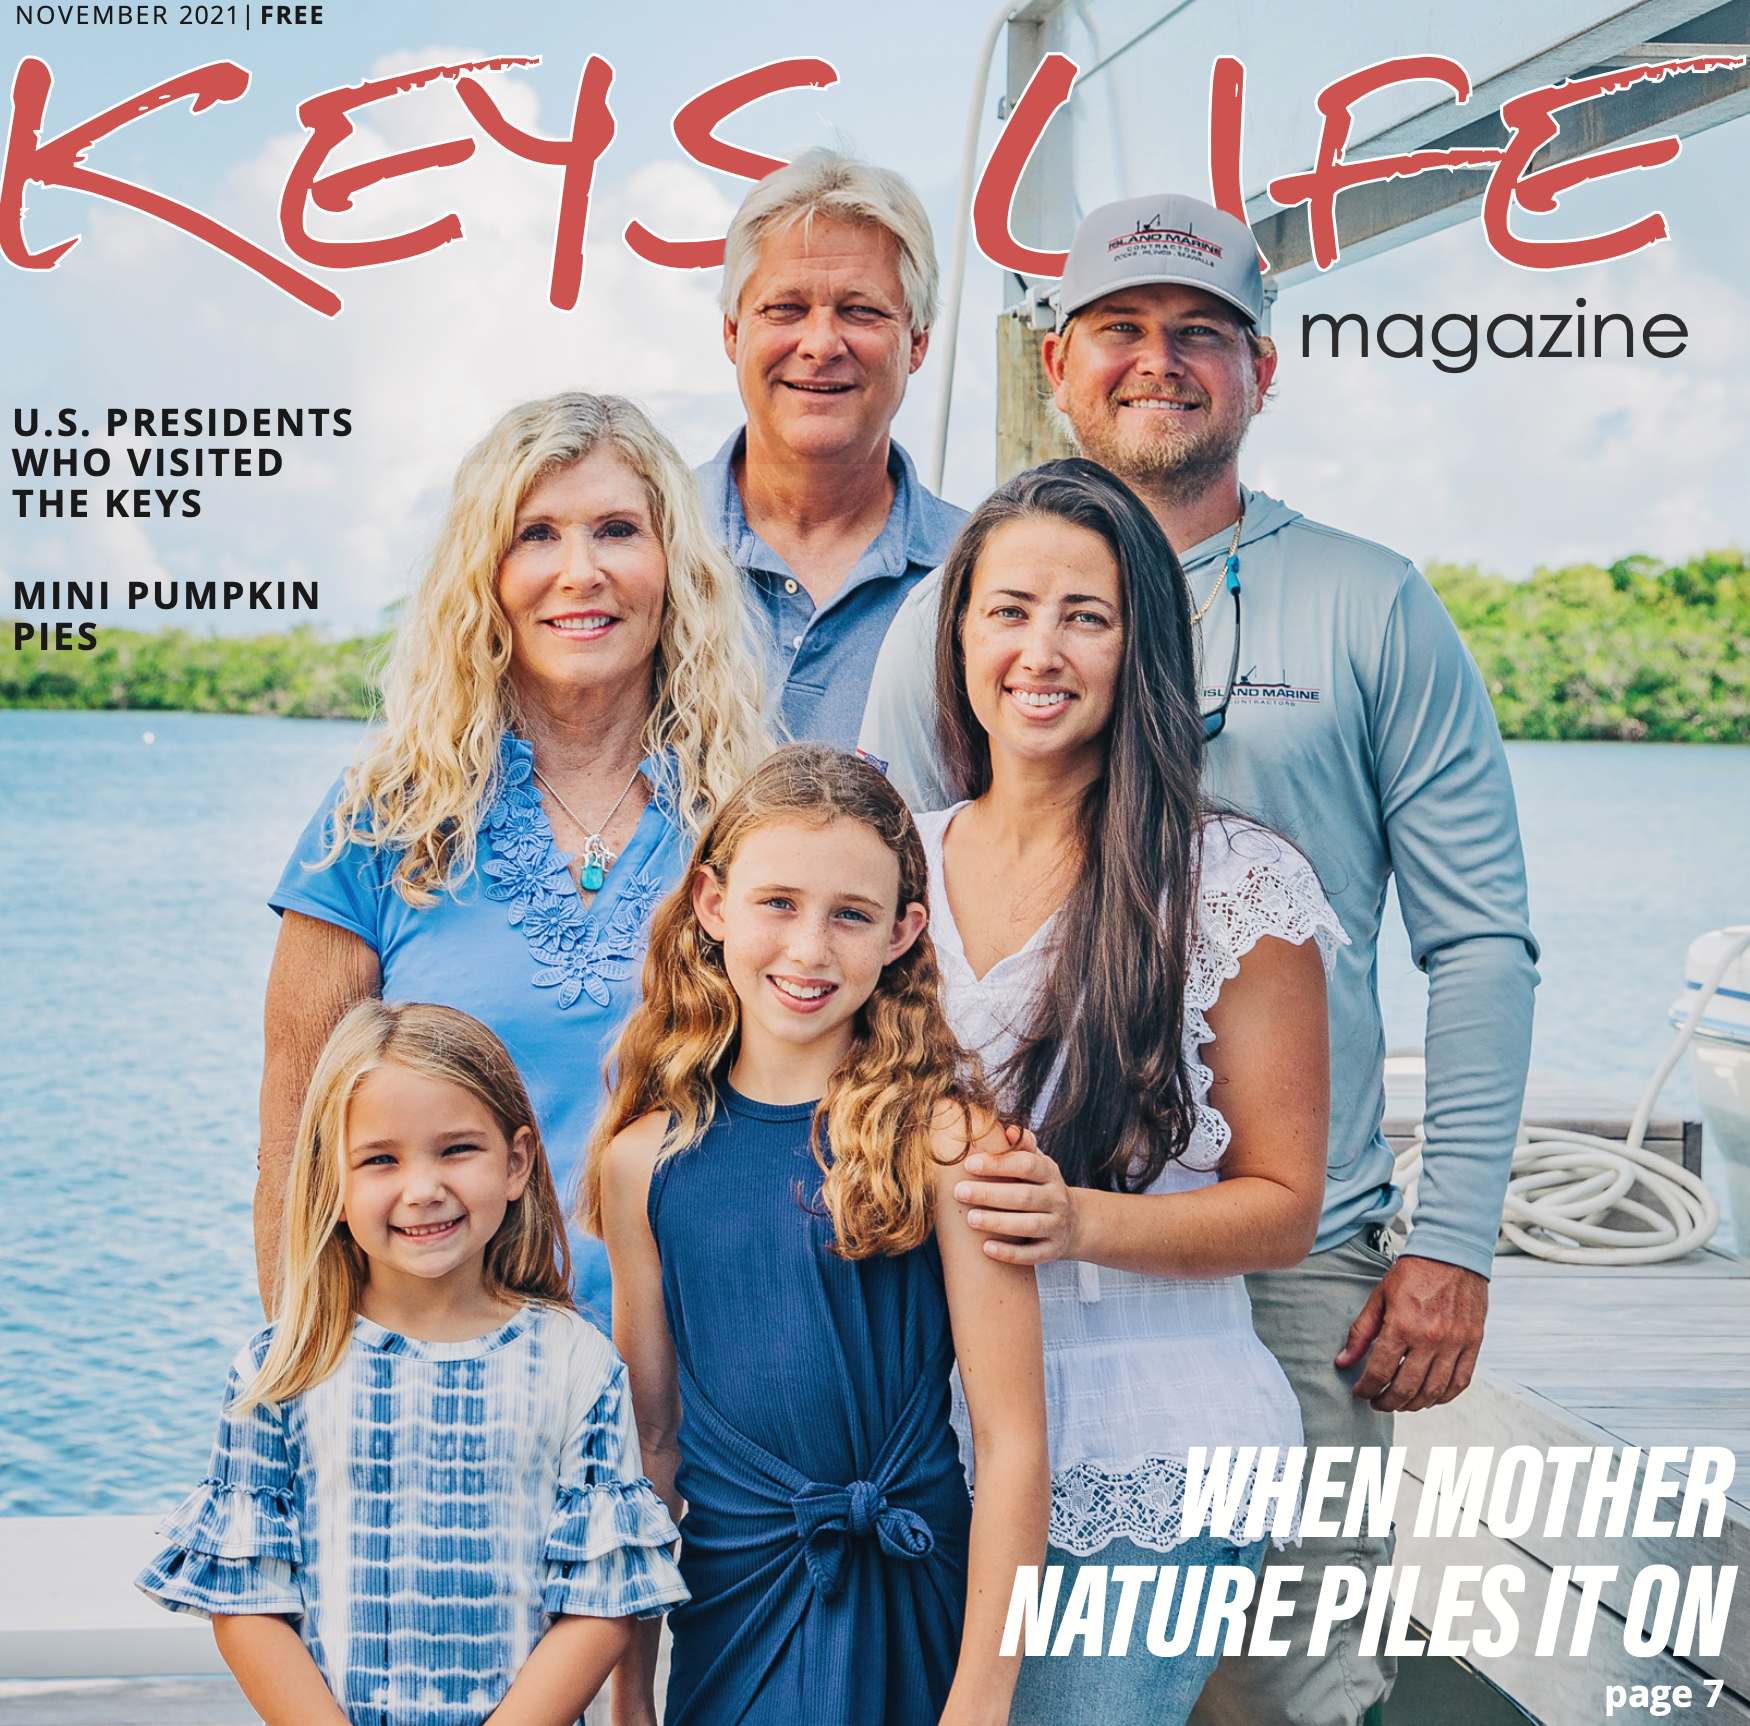 Read more about the article Keys Life Magazine November 2021